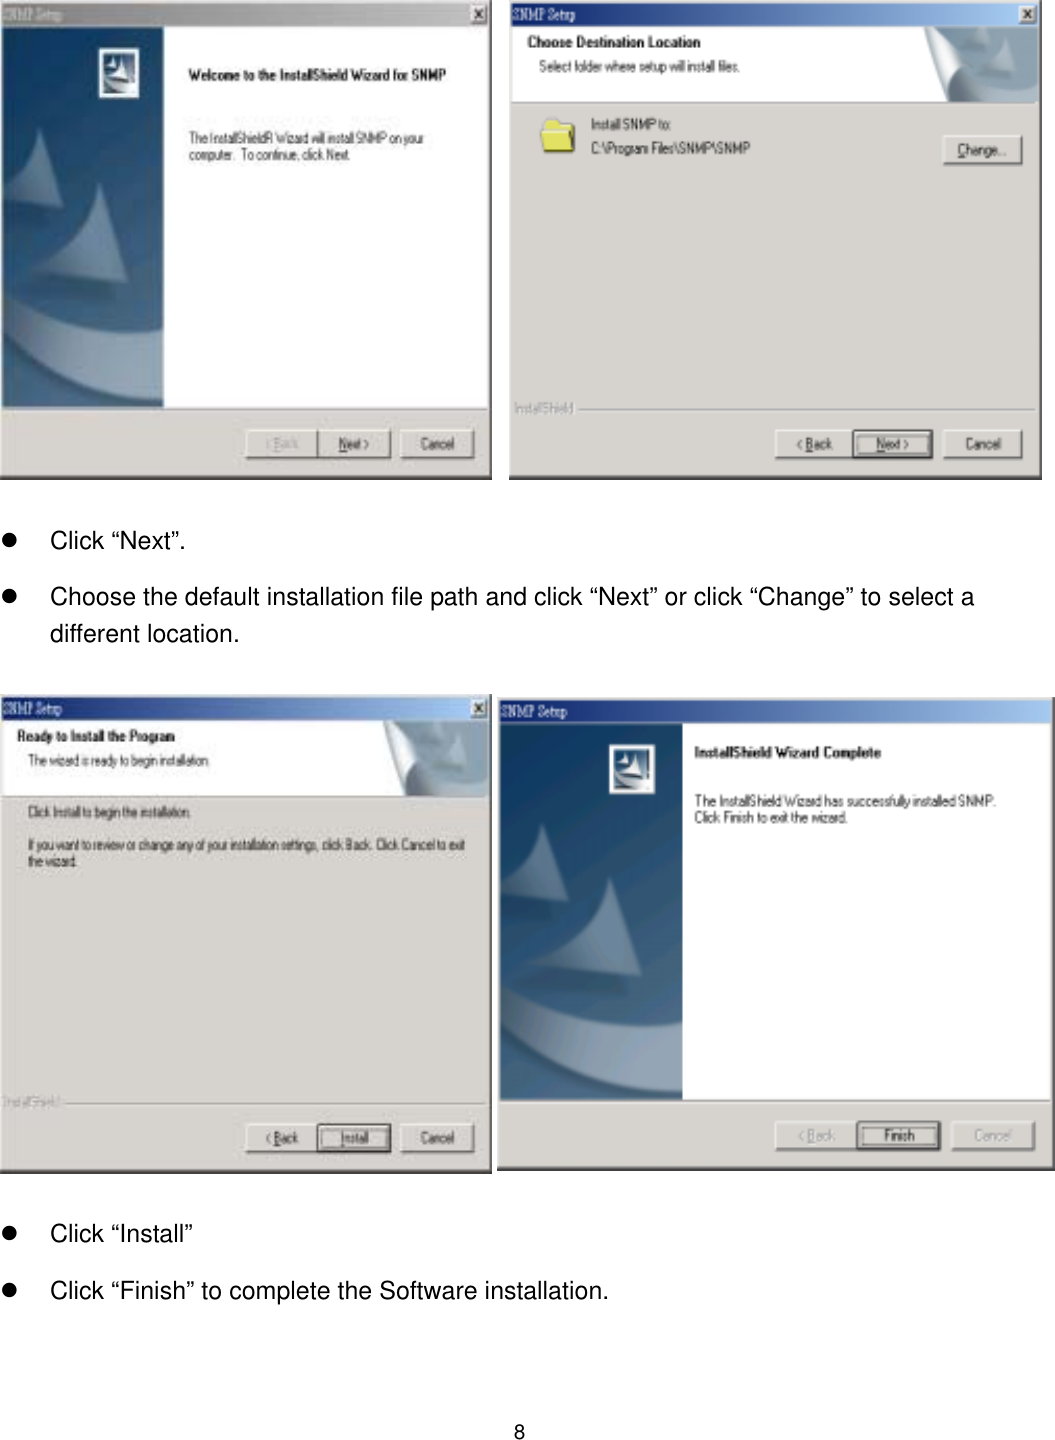    Click “Next”.   Choose the default installation file path and click “Next” or click “Change” to select a different location.   Click “Install”                             Click “Finish” to complete the Software installation.  8